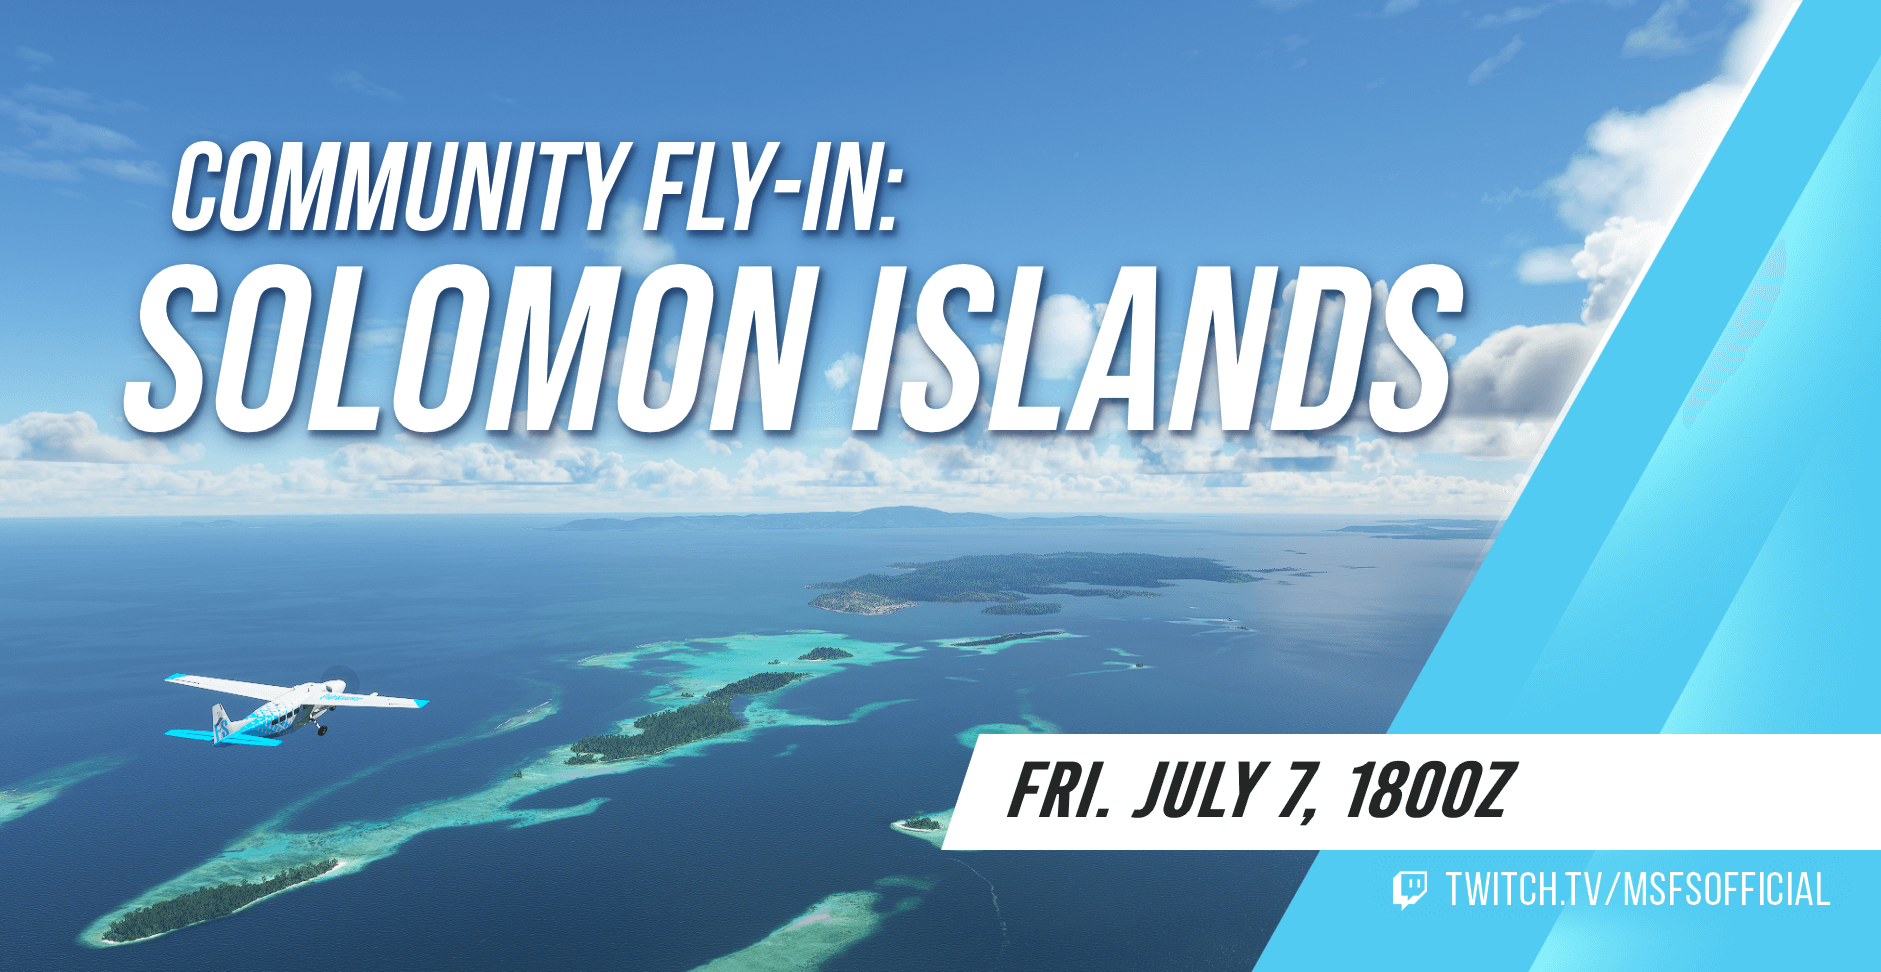 Community Fly-In: Solomon Islands. We will be streaming at twitch.tv/msfsofficial on Friday July 7th at 1800Z!